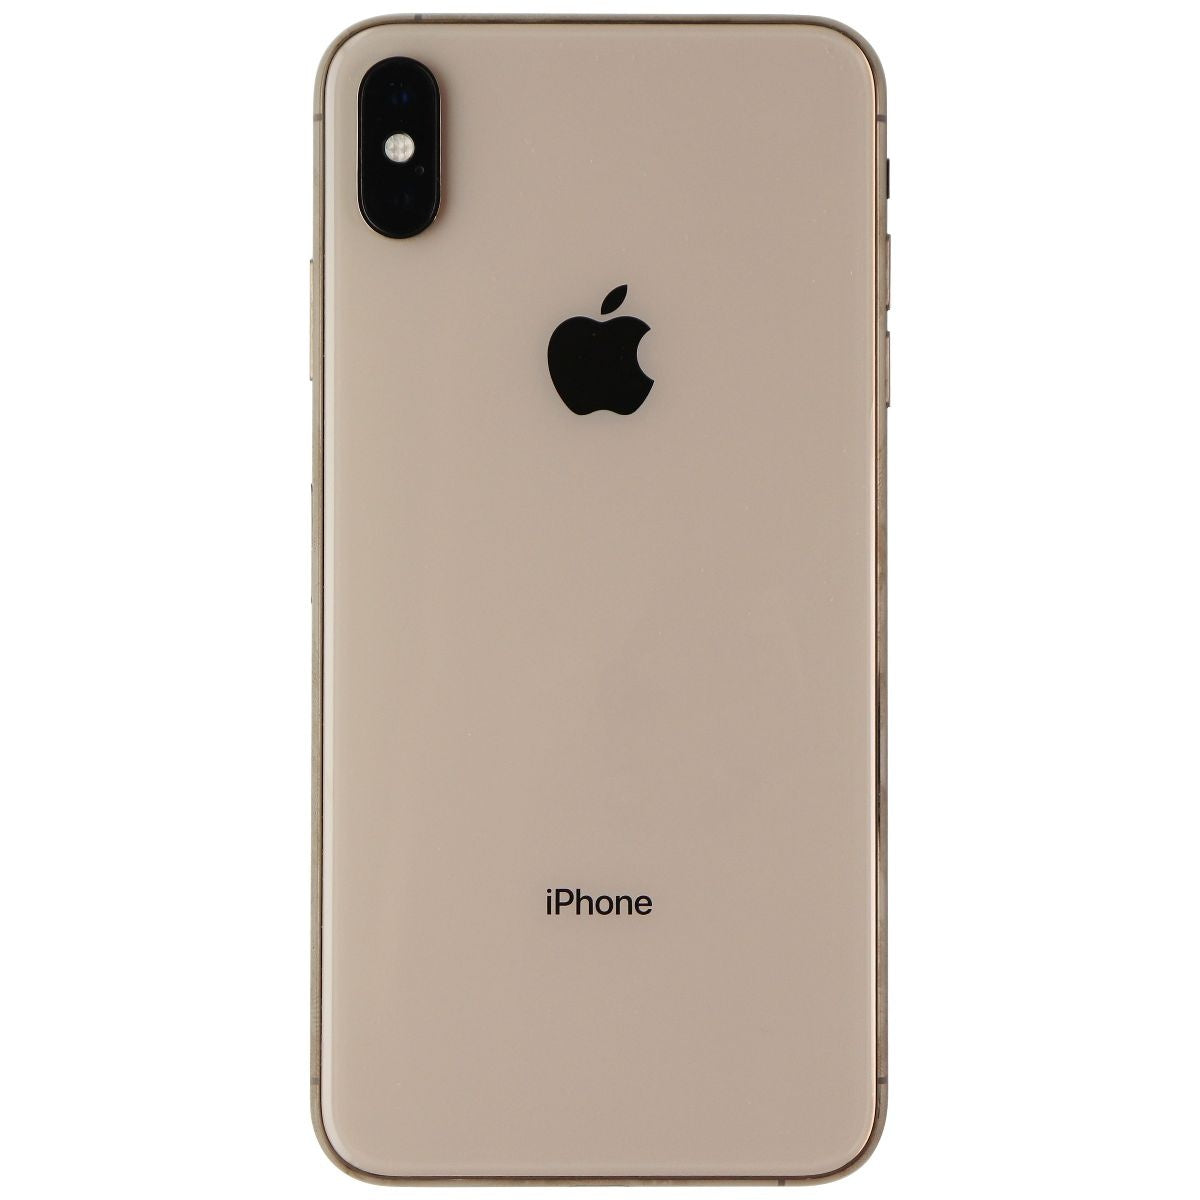 Apple iPhone Xs Max (6.5-inch) Smartphone (A1921) UNLOCKED - 256GB / Gold Cell Phones & Smartphones Apple    - Simple Cell Bulk Wholesale Pricing - USA Seller